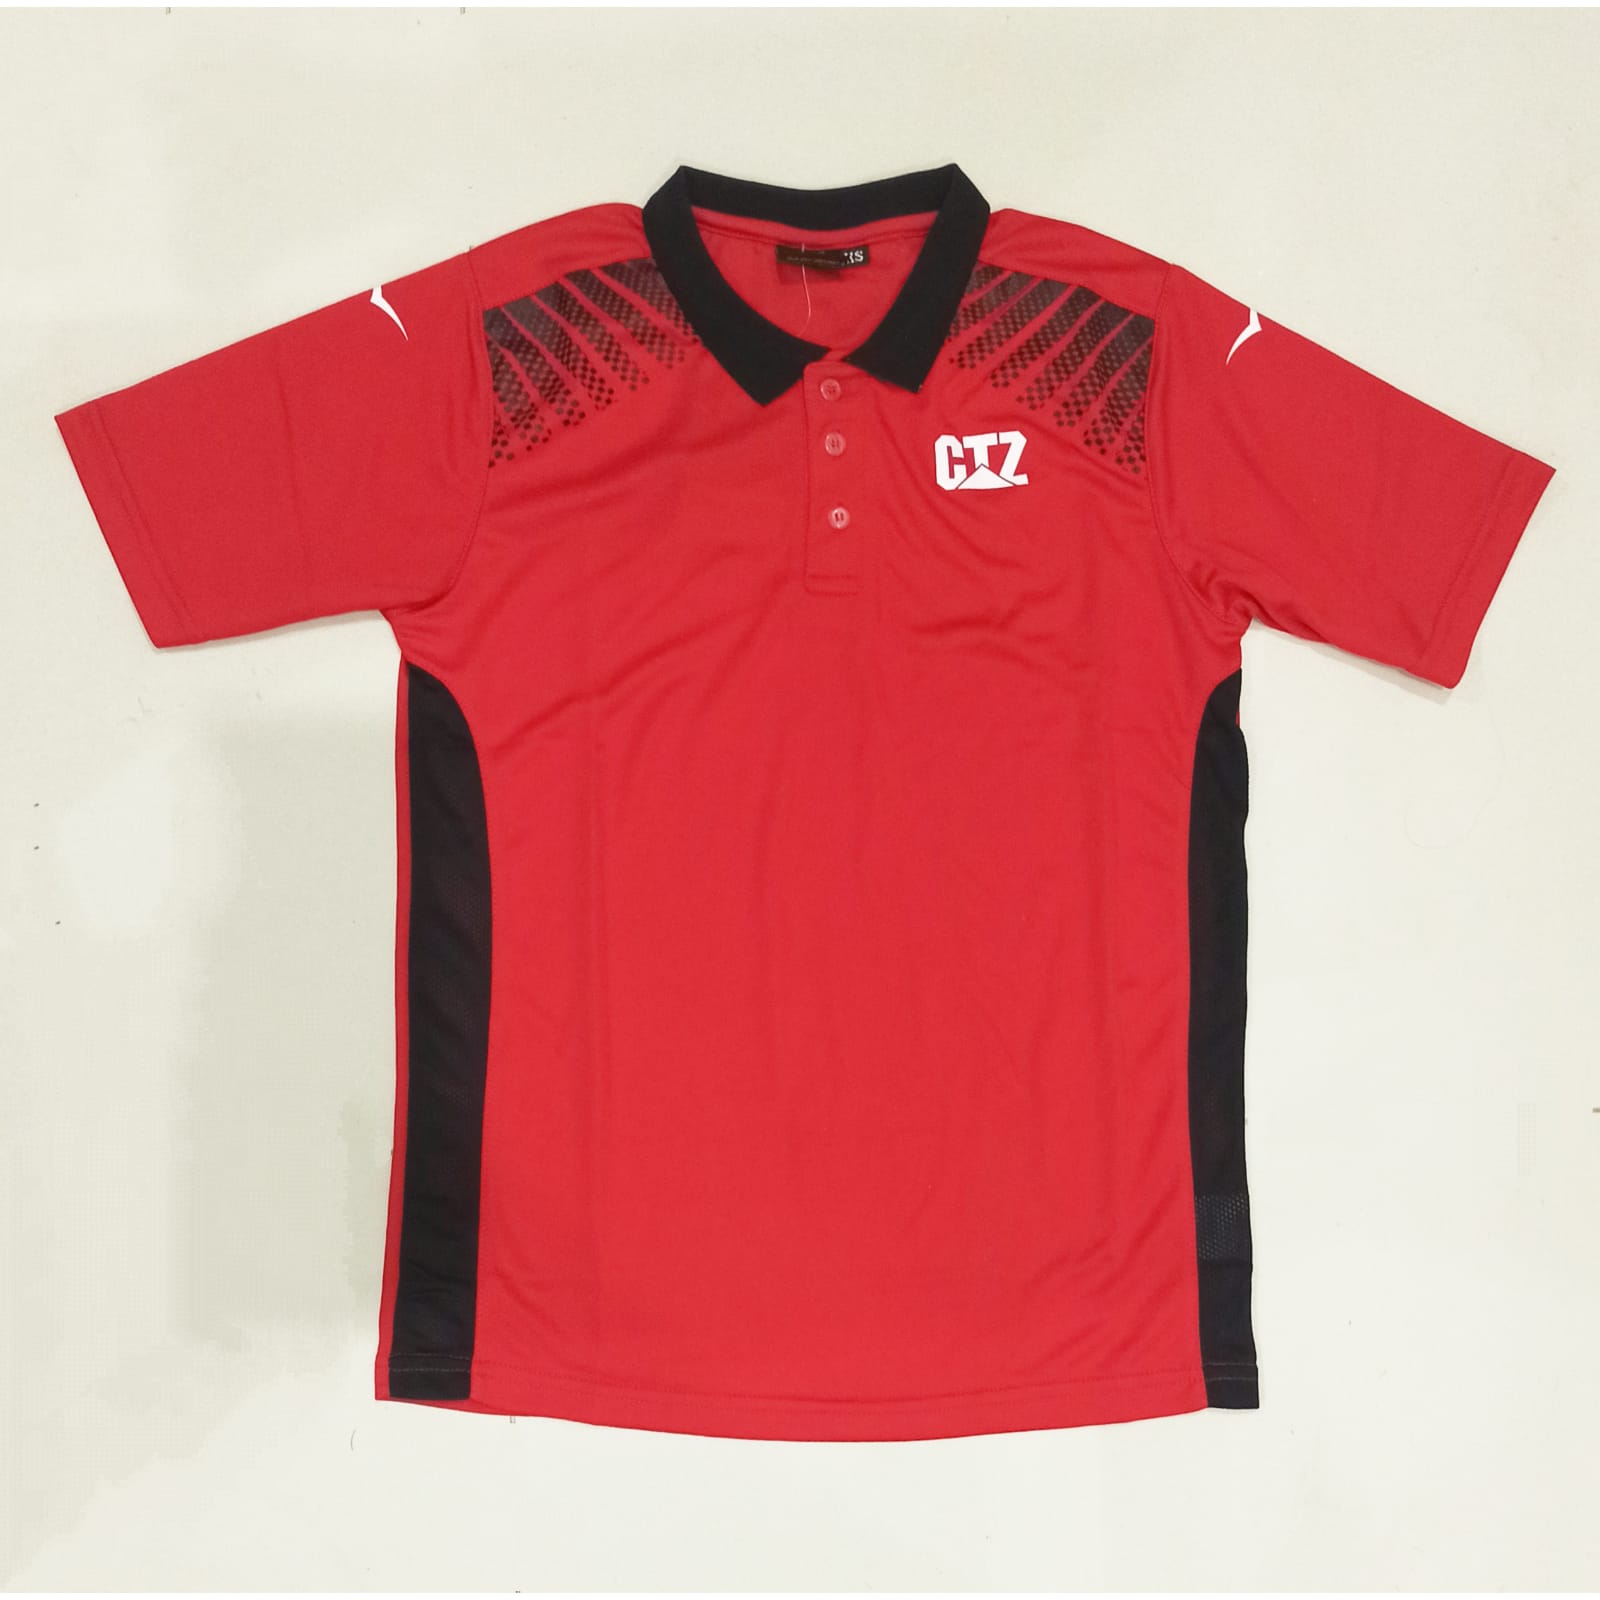 K Club - Branded Polo Shirt Red with Black Print